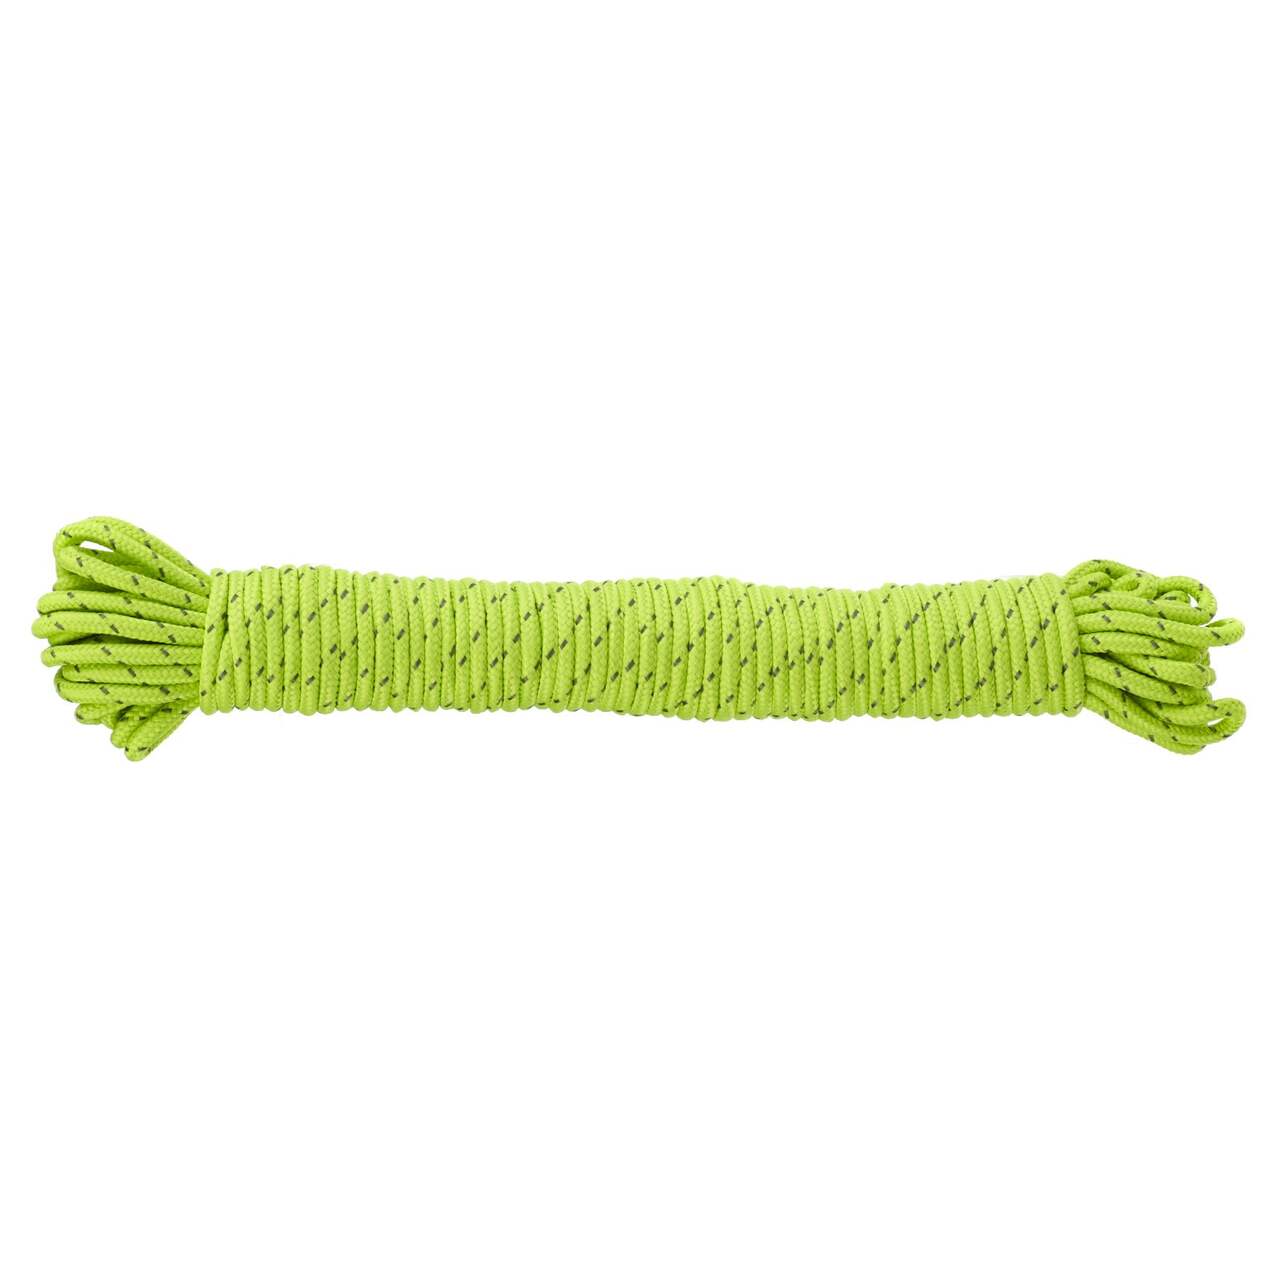 Outbound Reflective High-Visibility Utility Paracord Rope w